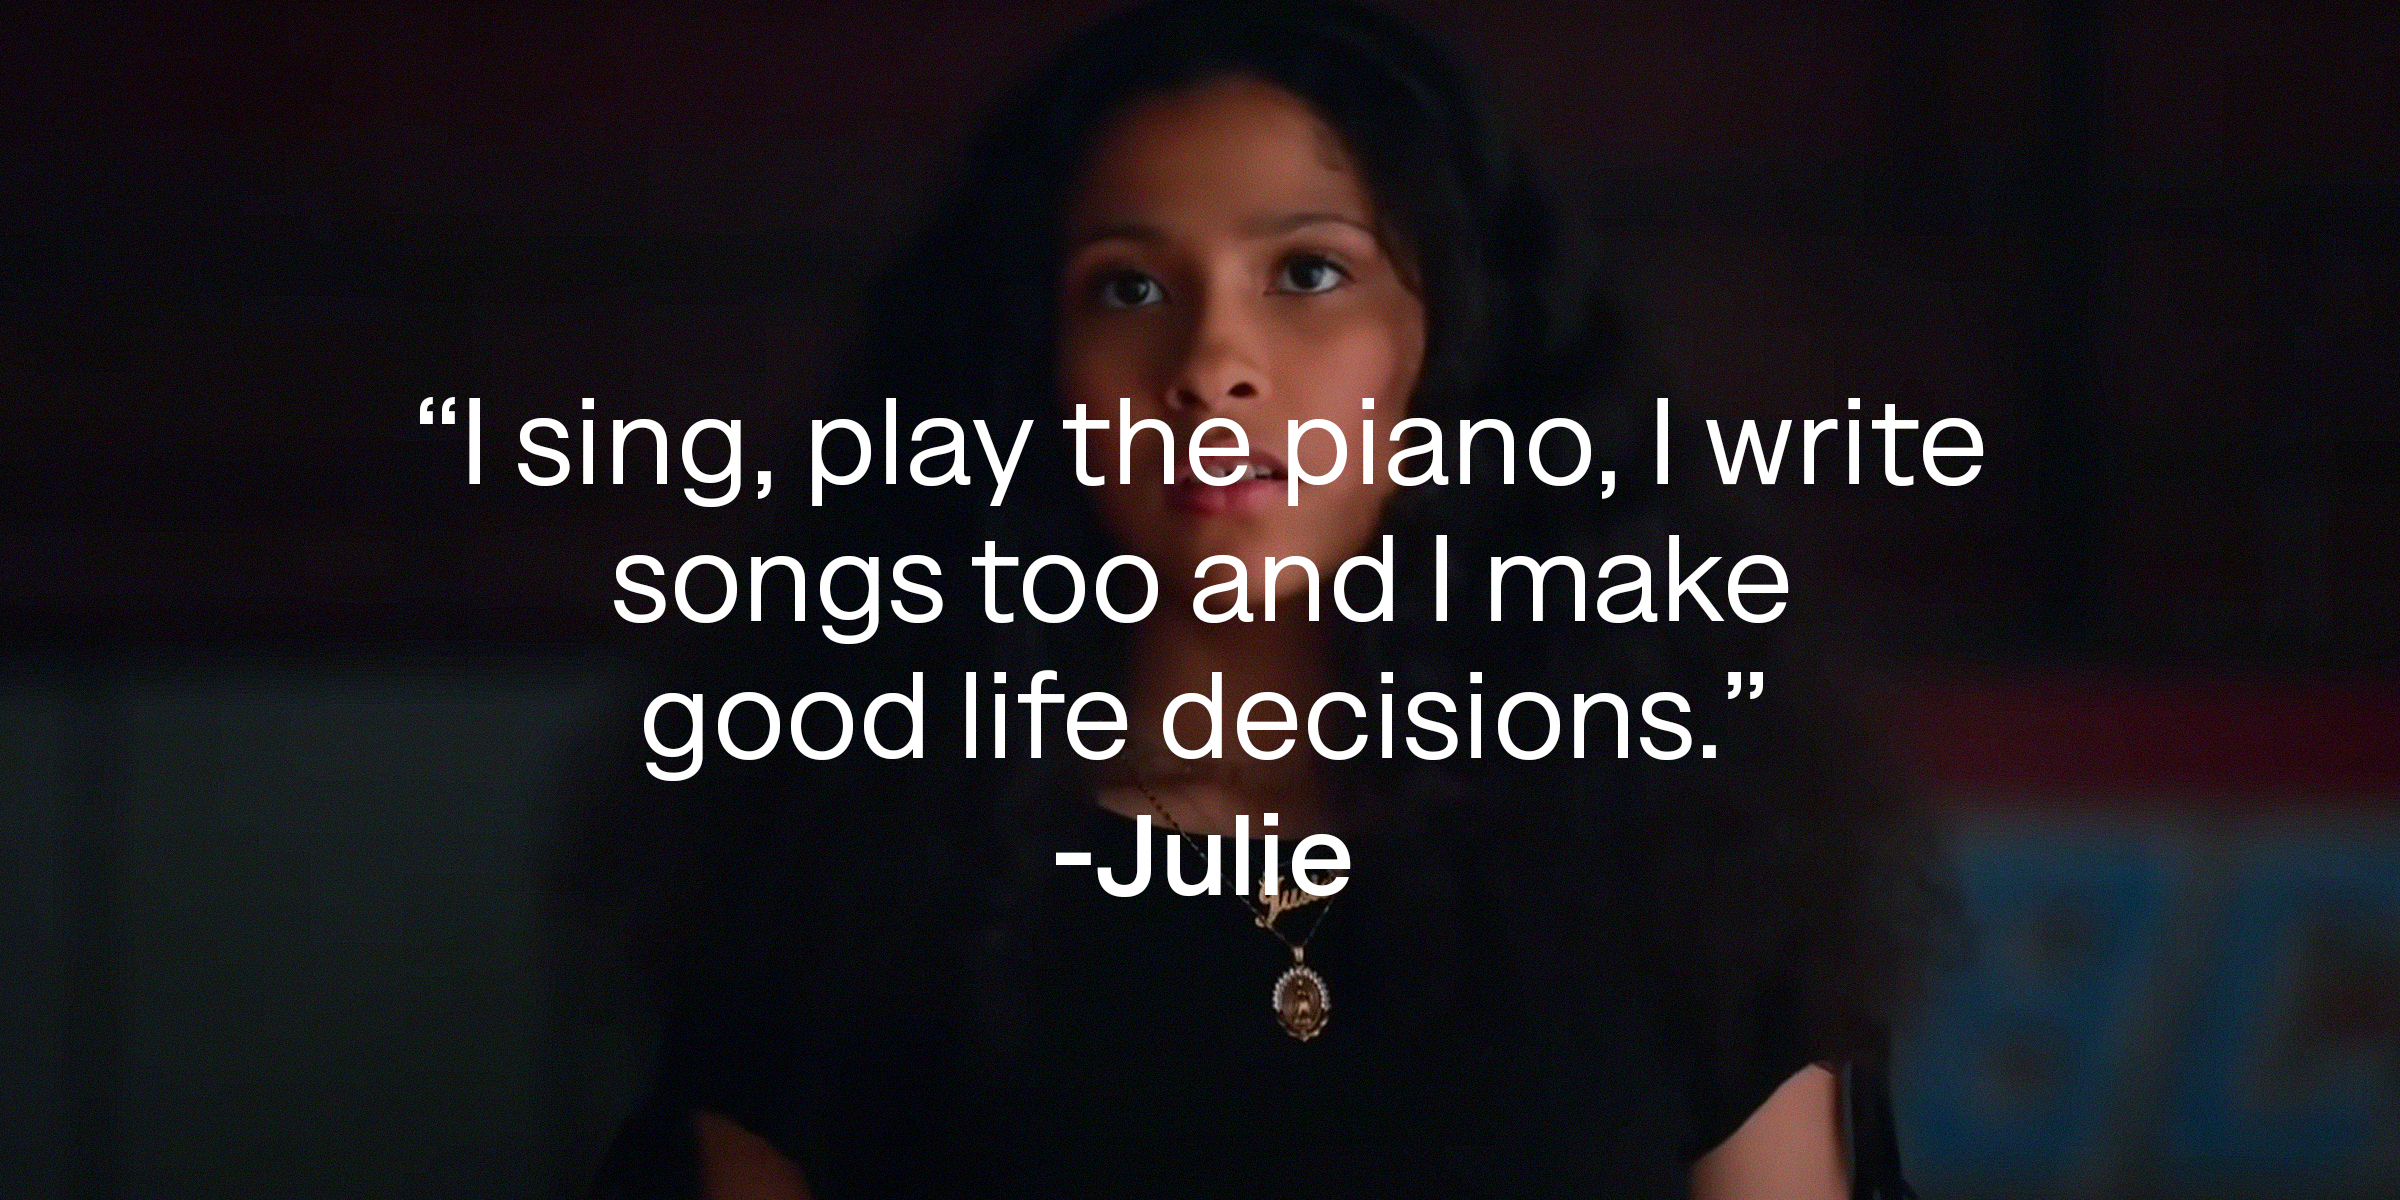 An image of Julie with her quote: "I sing, play the piano, I write songs too and I make good life decisions." | Source: youtube.com/netflixafterschool